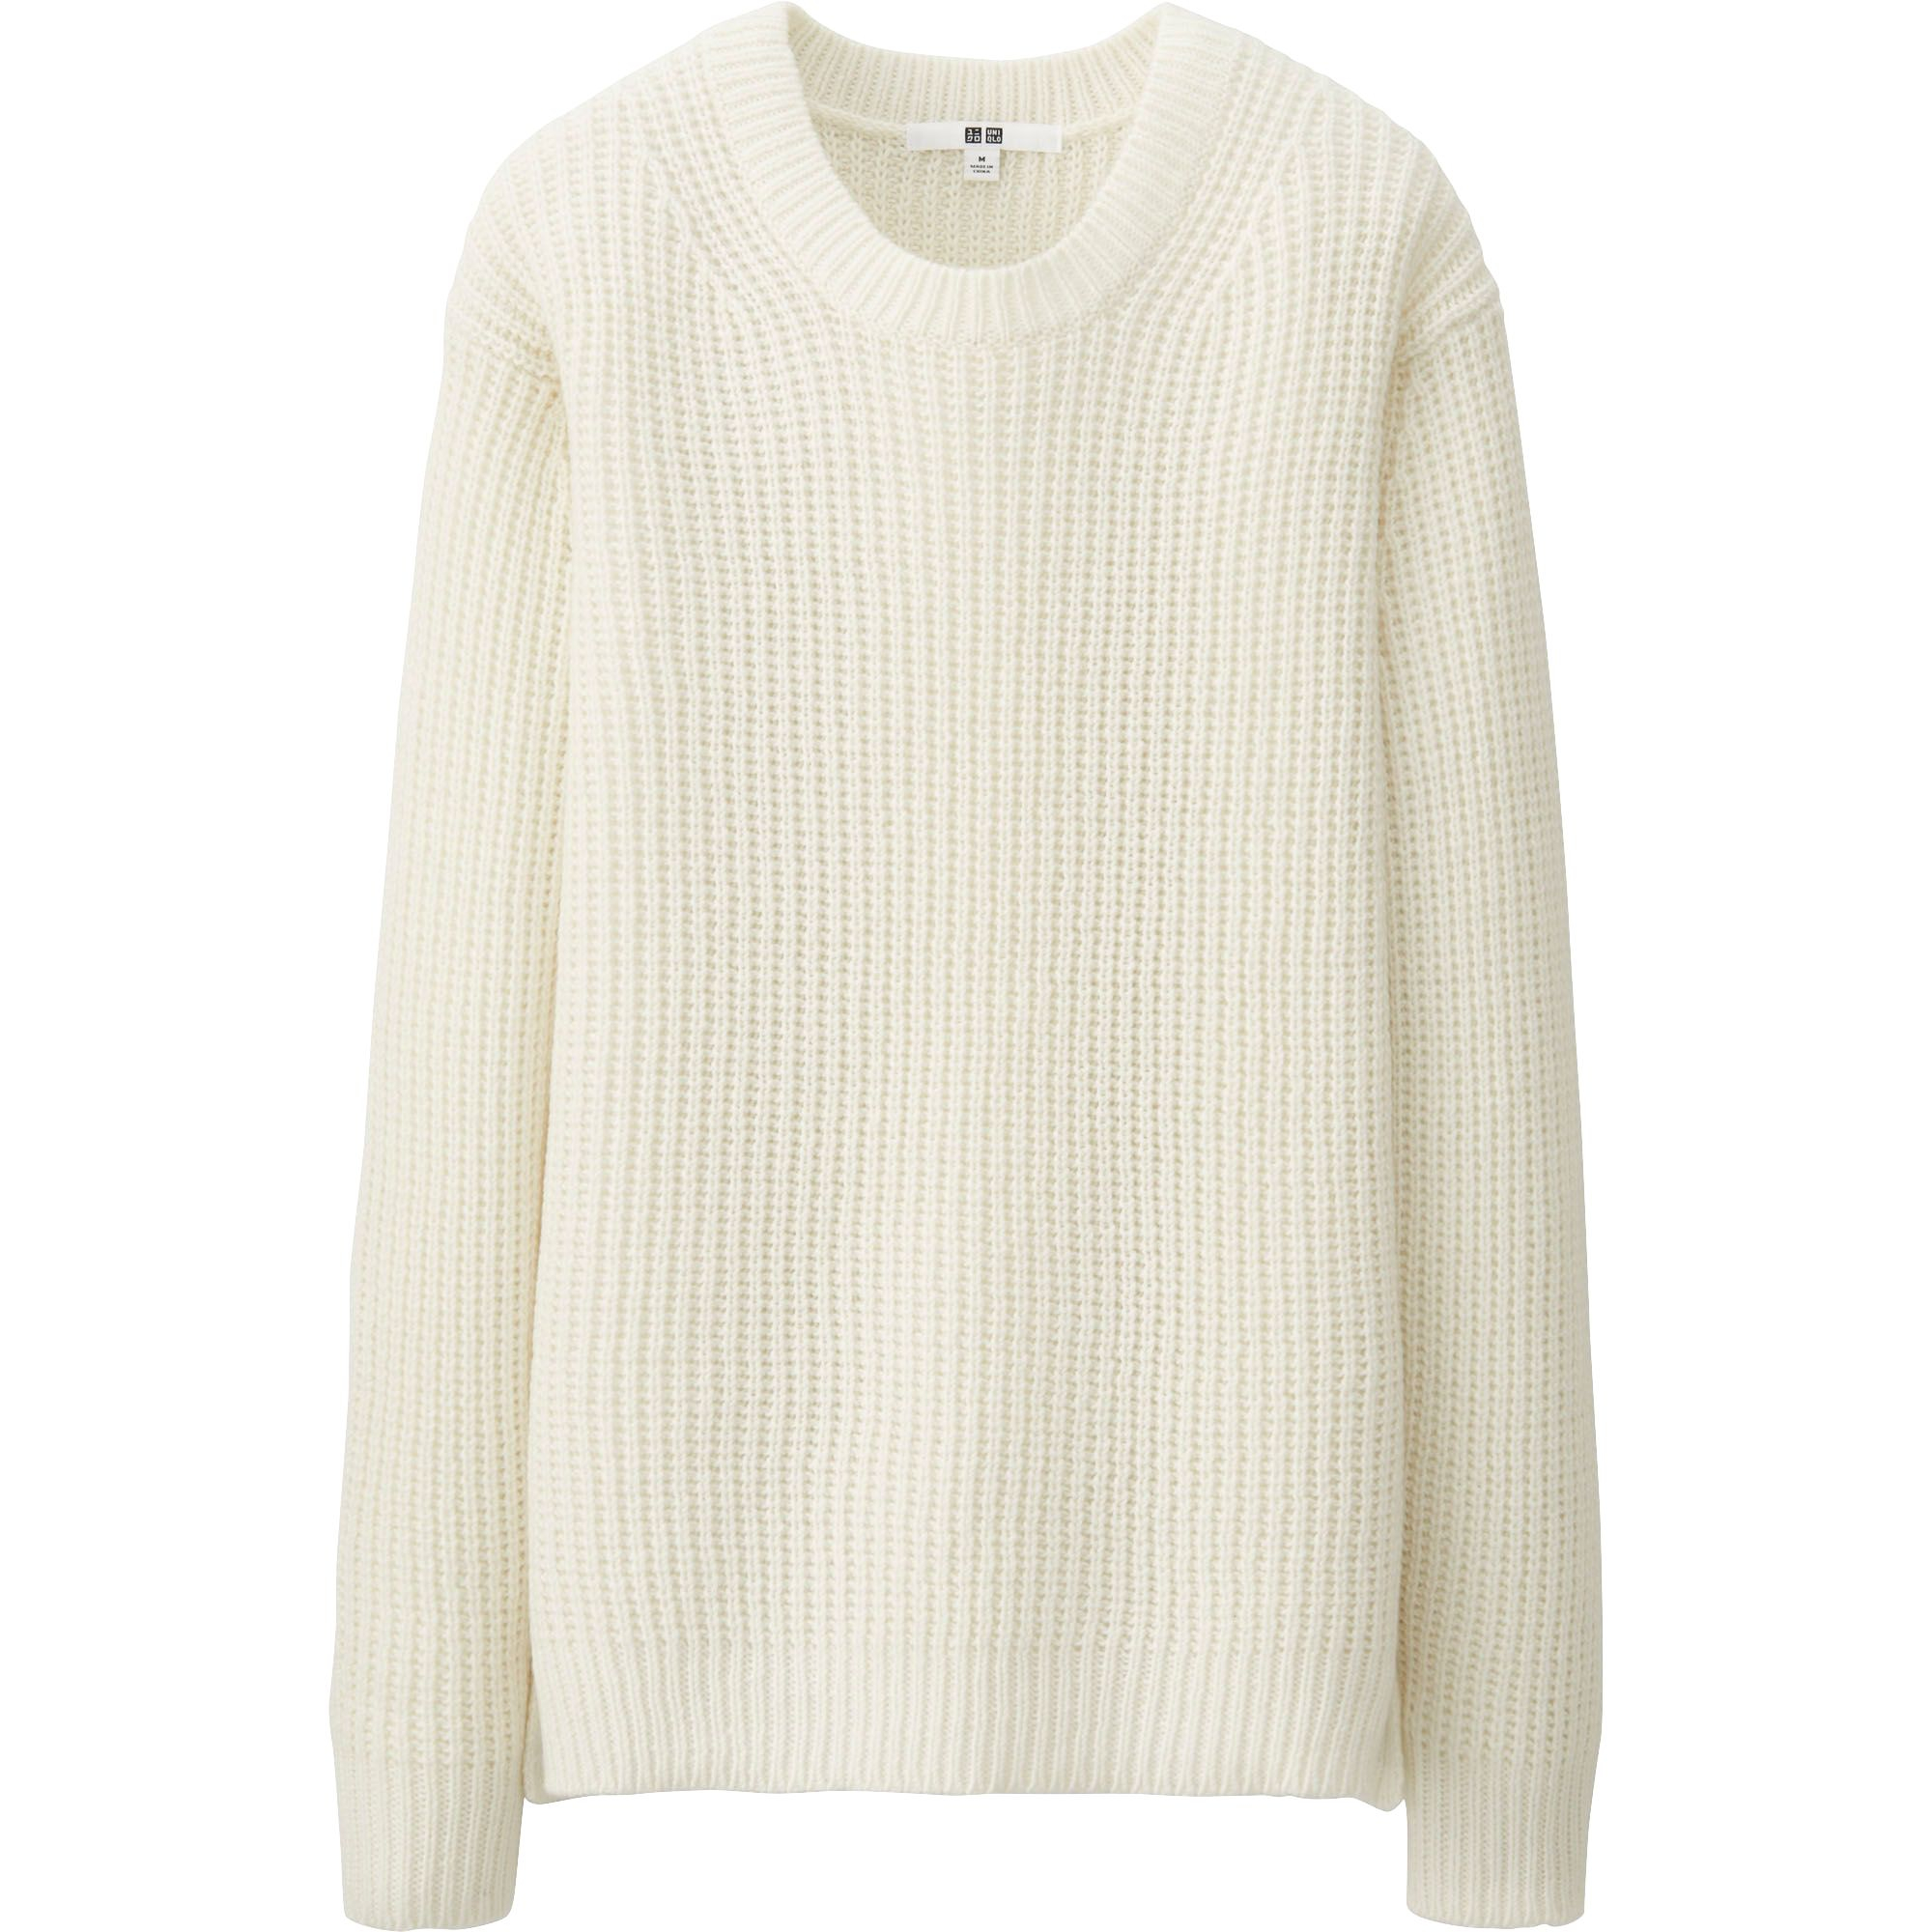 Uniqlo Women Middle Gauge Crew Neck Sweater in White | Lyst